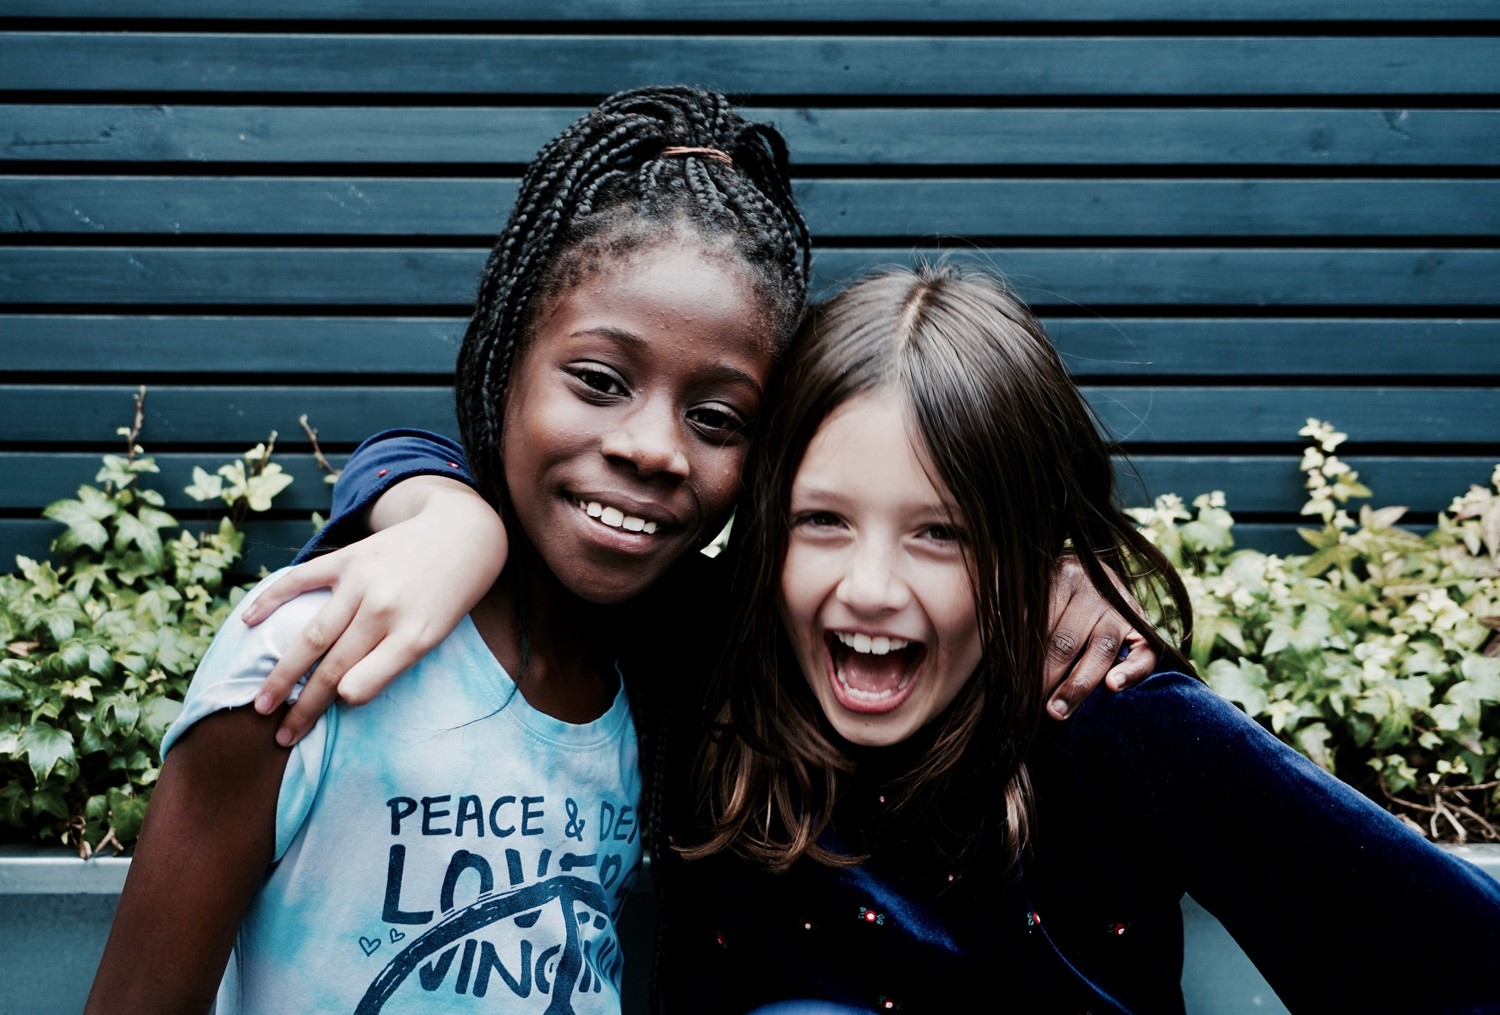 Lily at her leaving party with friend Astou